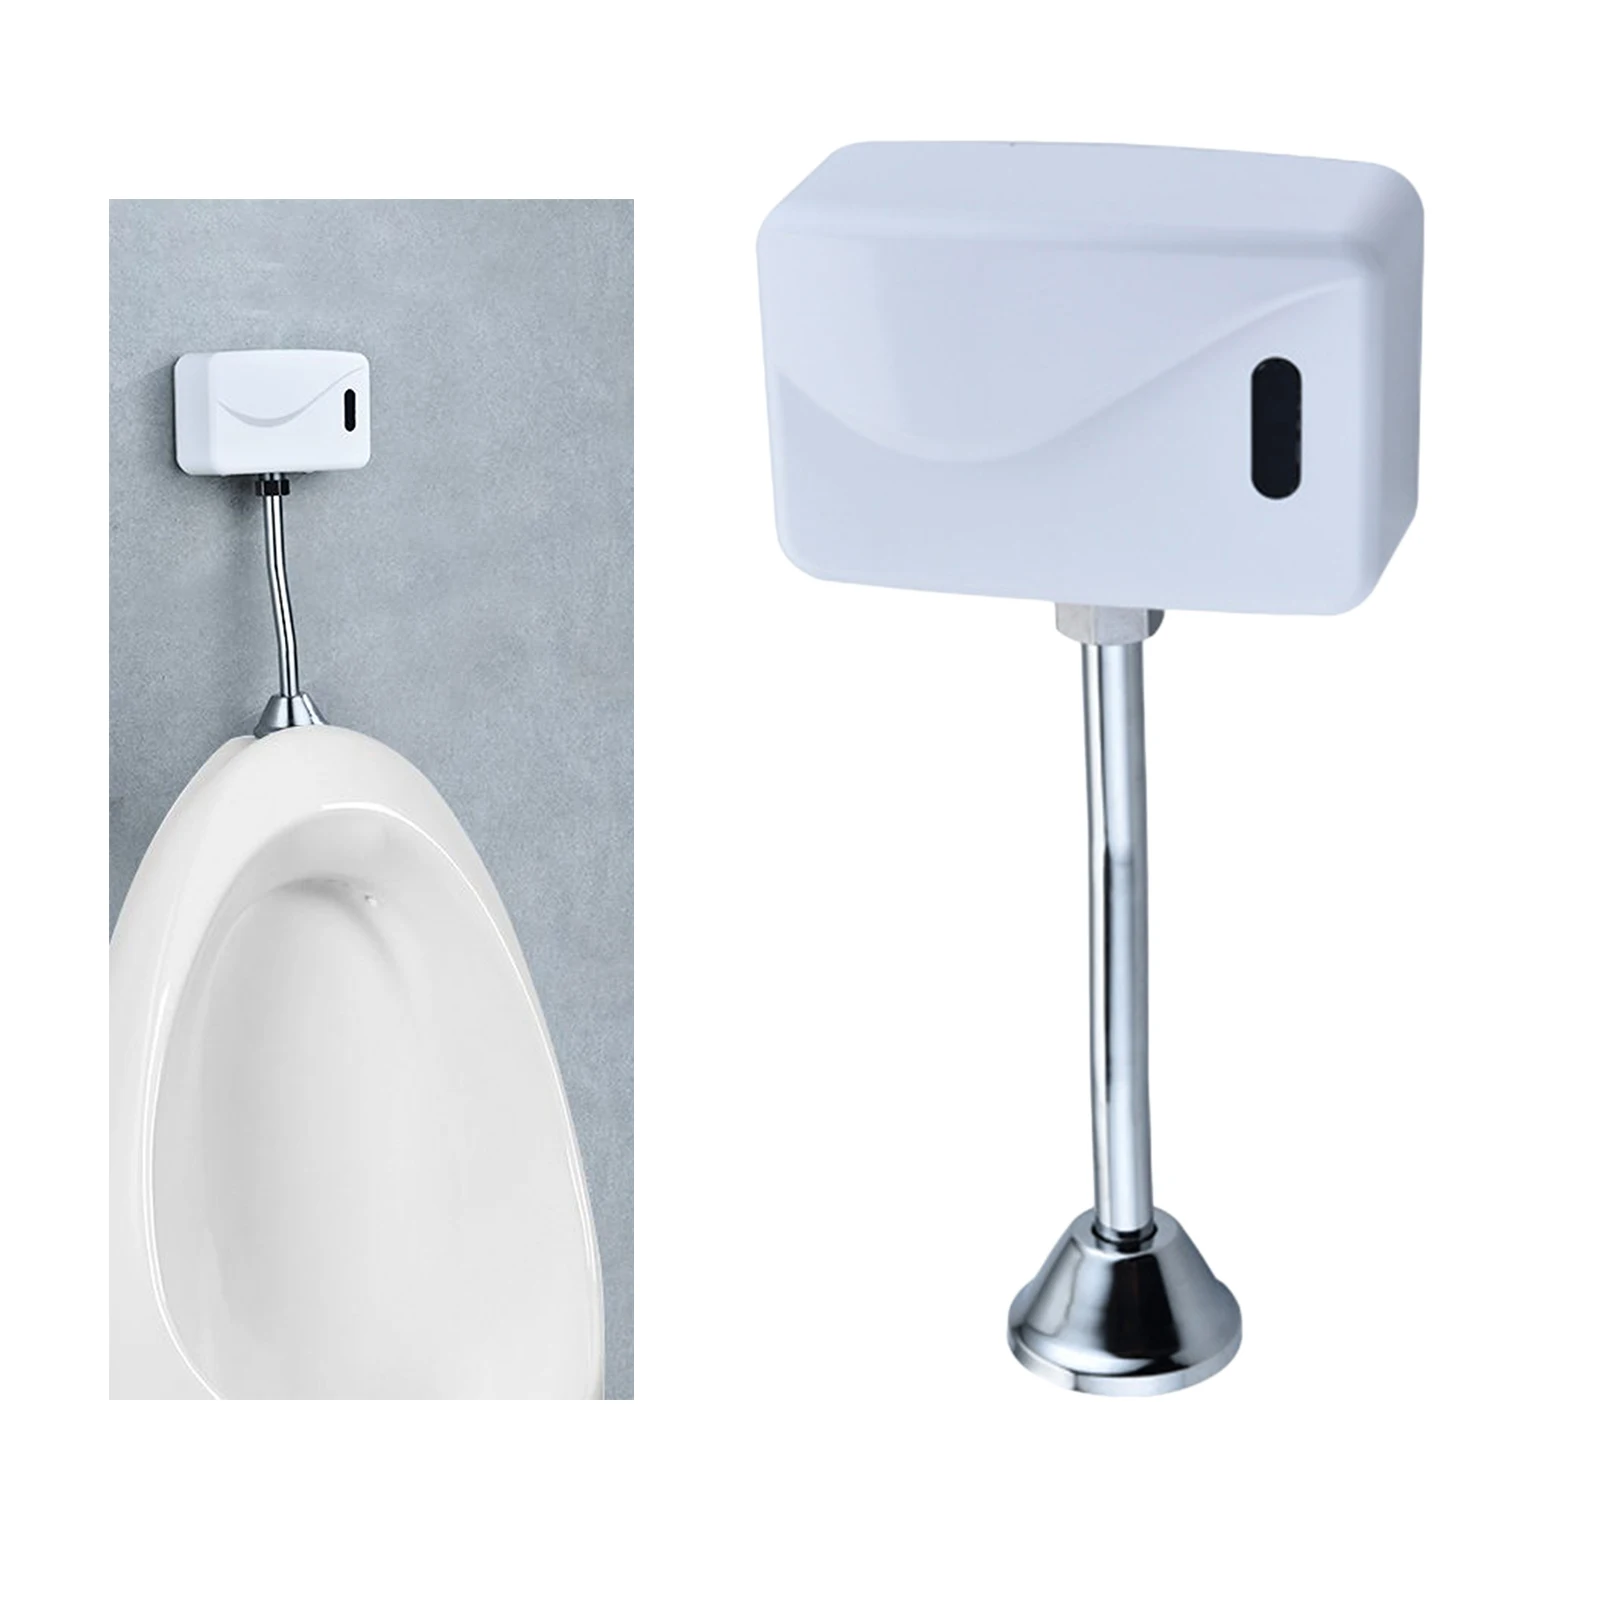 Fully-automatic Bathroom Toliet Wall Mount Auto Sensor Touchless Urinal Flush 